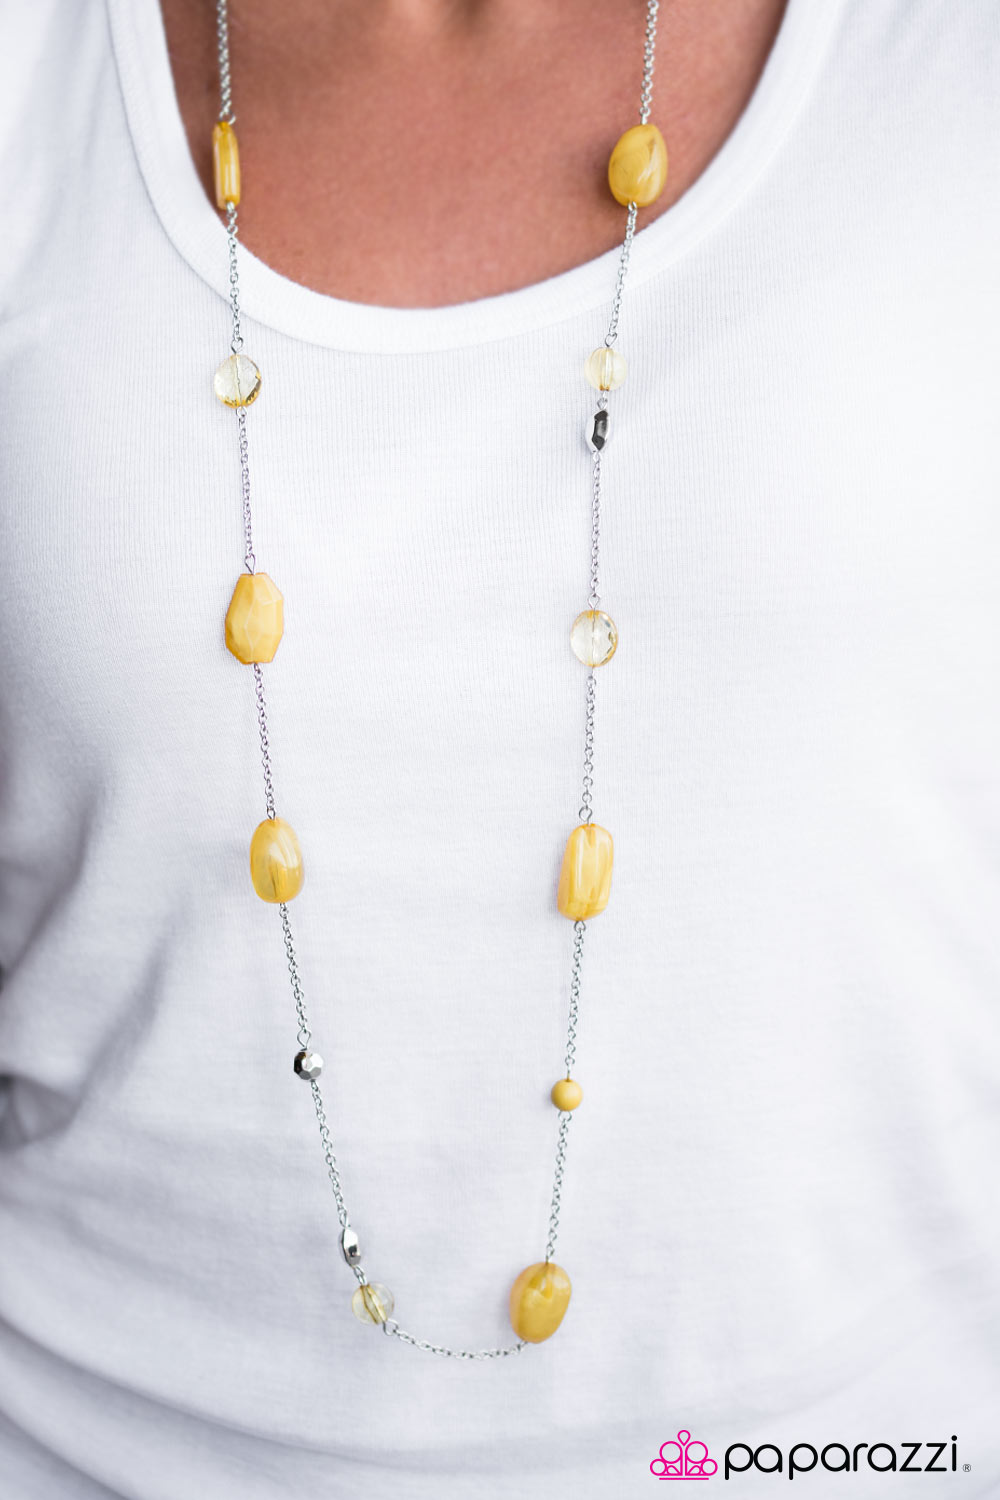 River Cruise -  yellow - Paparazzi necklace